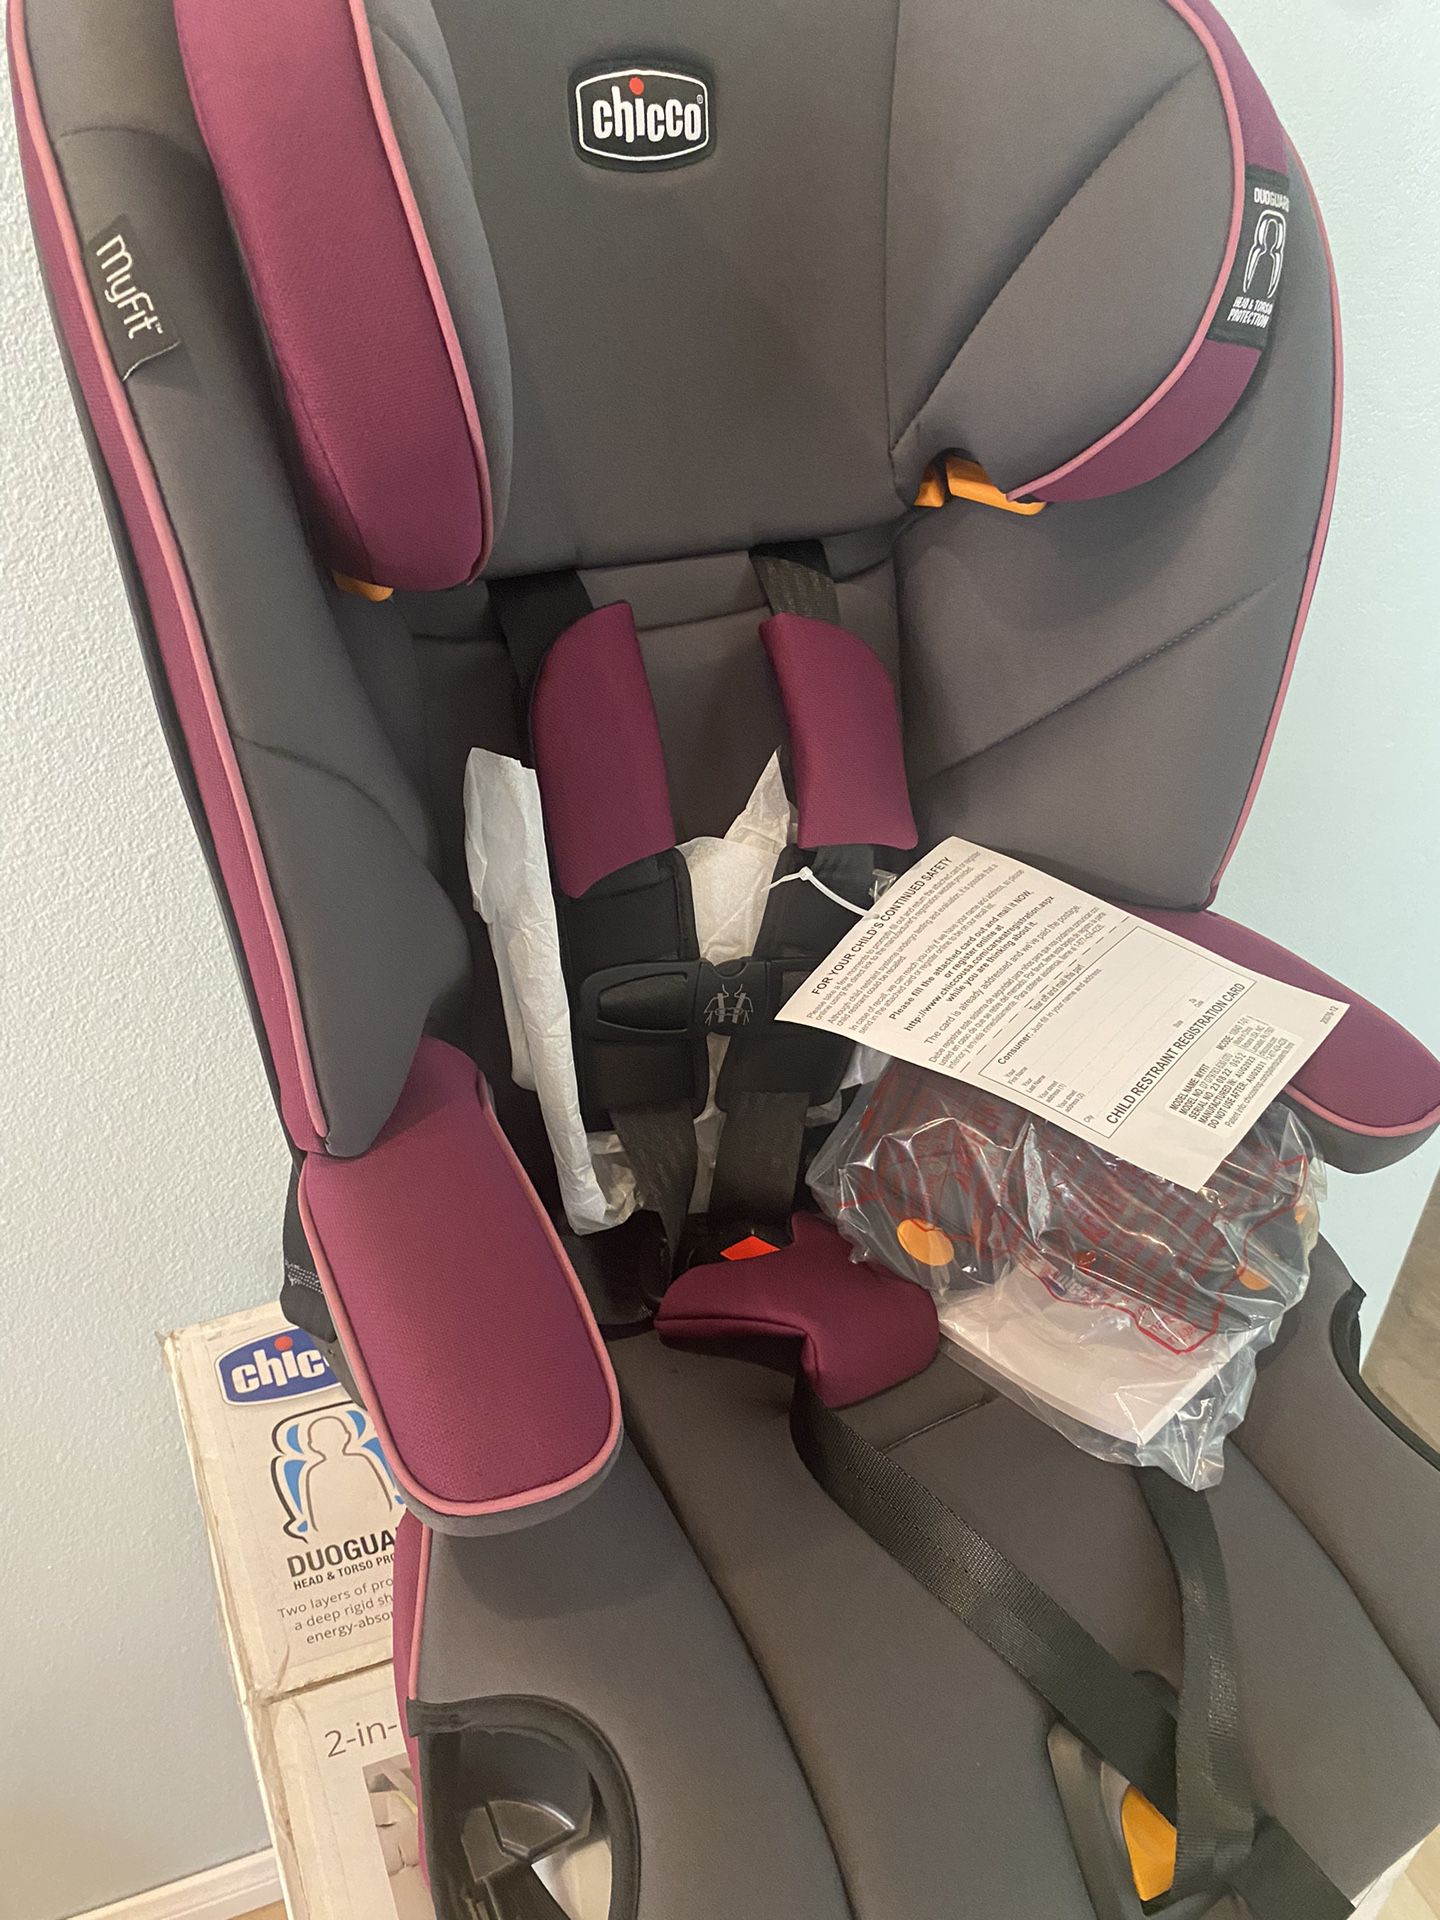 Chicco Myfit Harness+Booster Car Seat